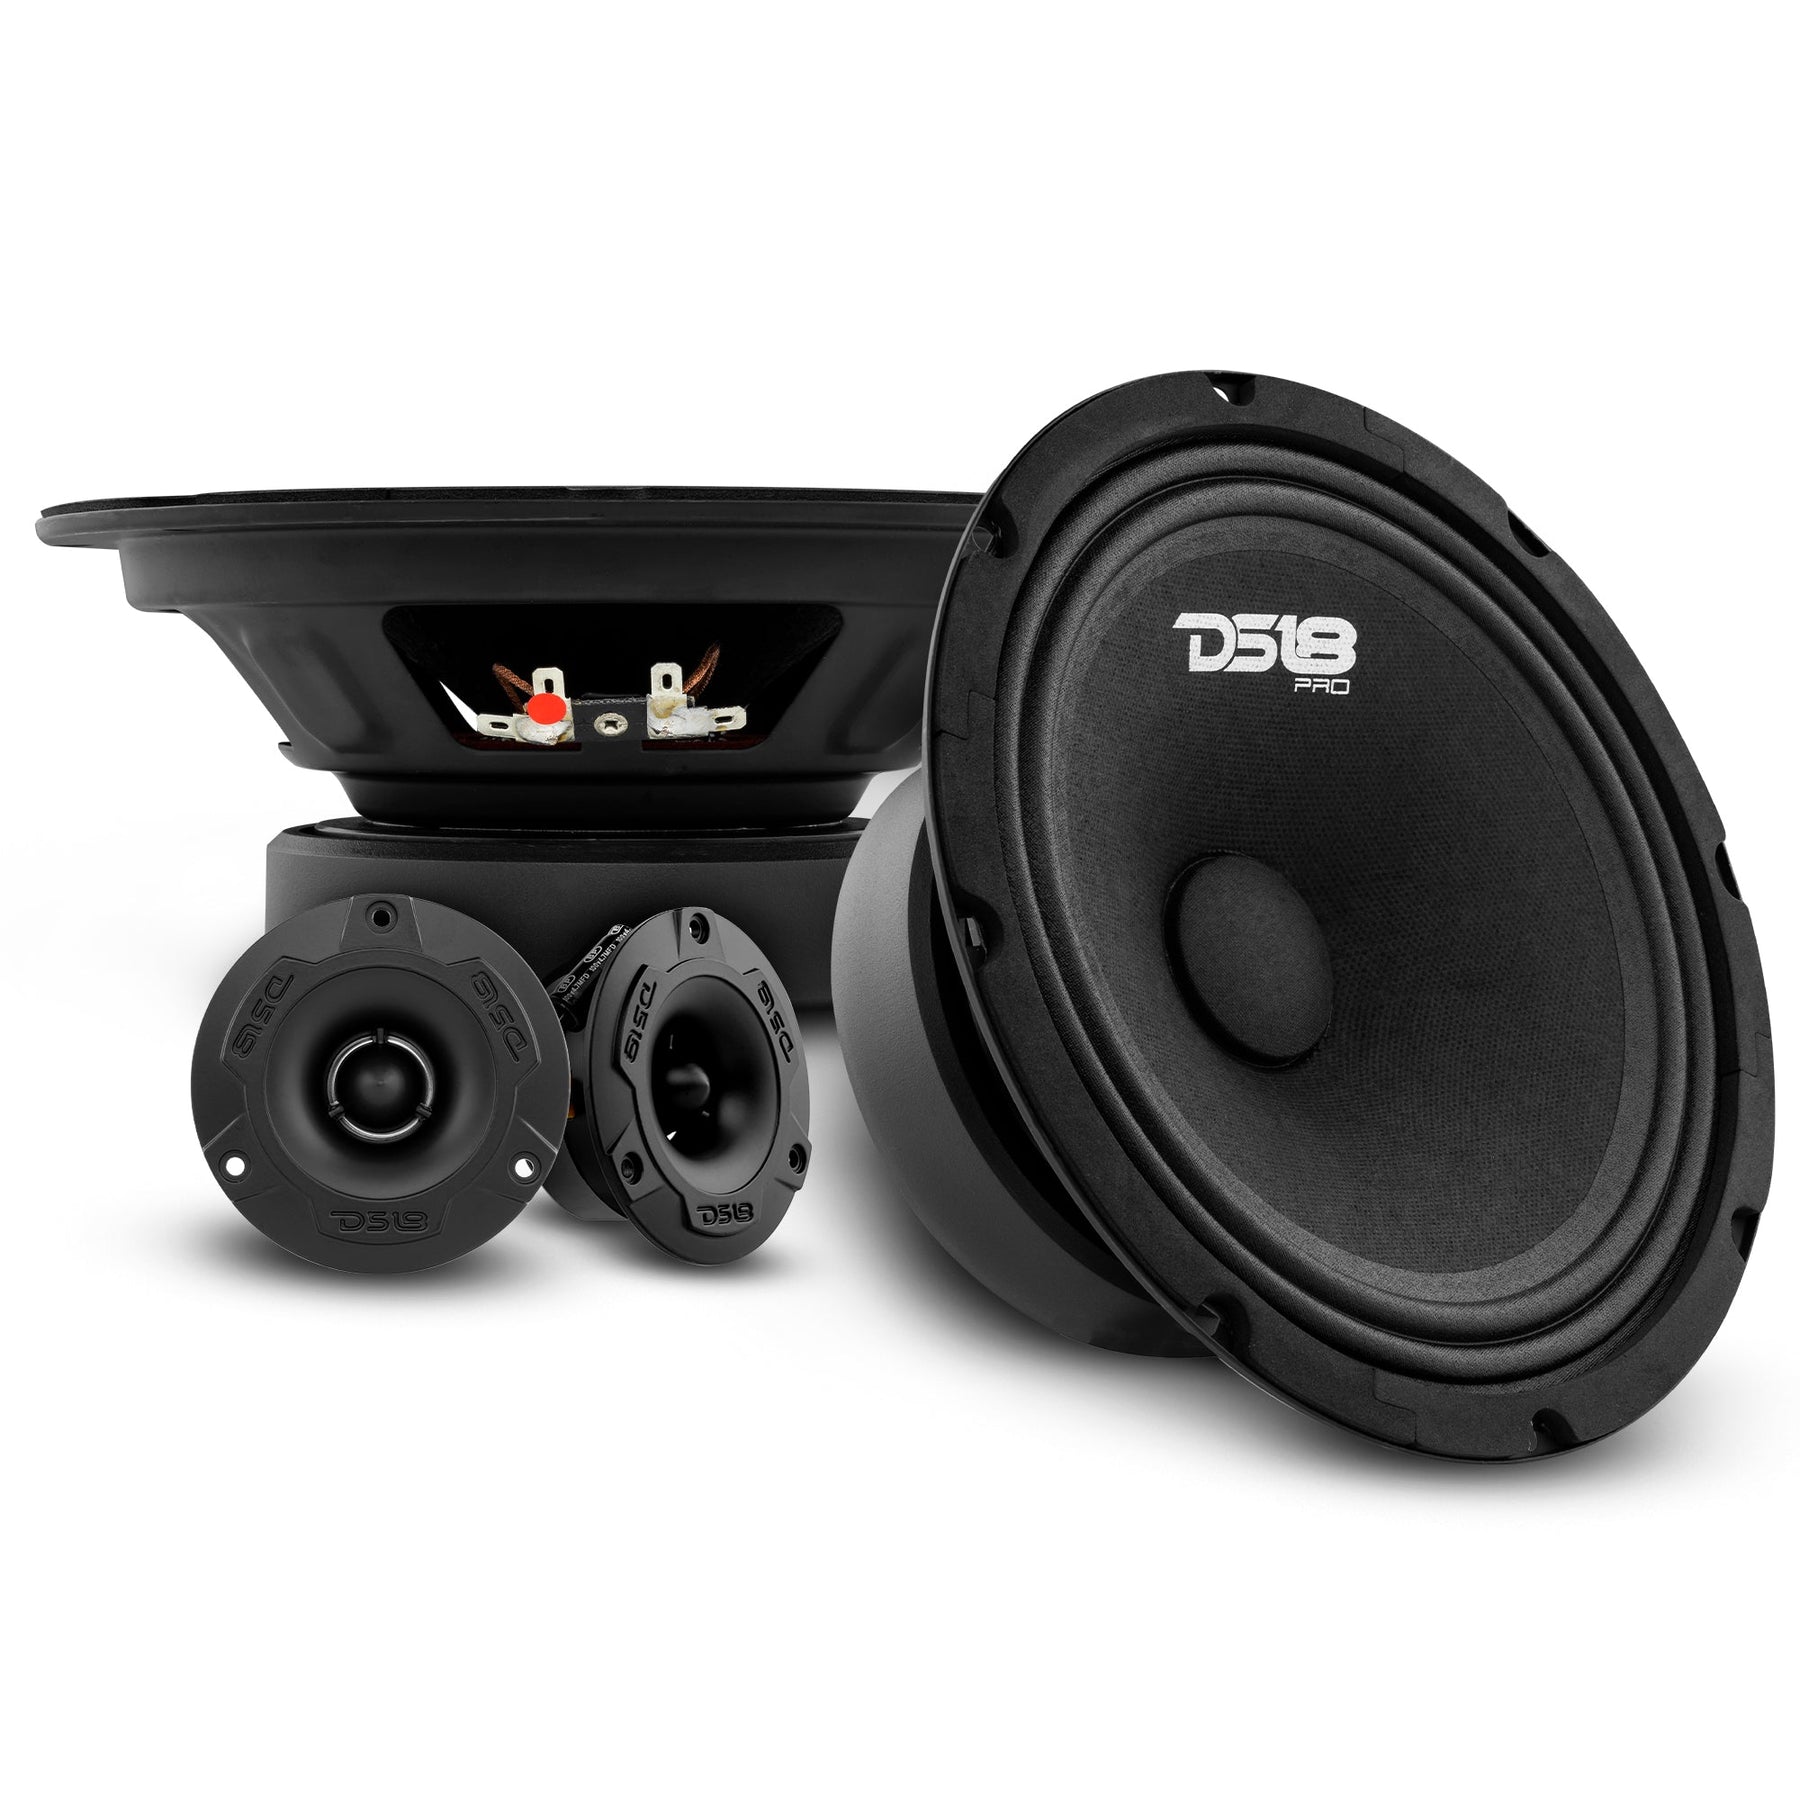 DS18 PRO-GM8.4PK+AMP Loudspeakers and Tweeters Package Including Pair of PRO-GM6.4 + Pair of PRO-TW1X/BK + GEN-X1600.4 AMP + AMPKIT4. 1600 4